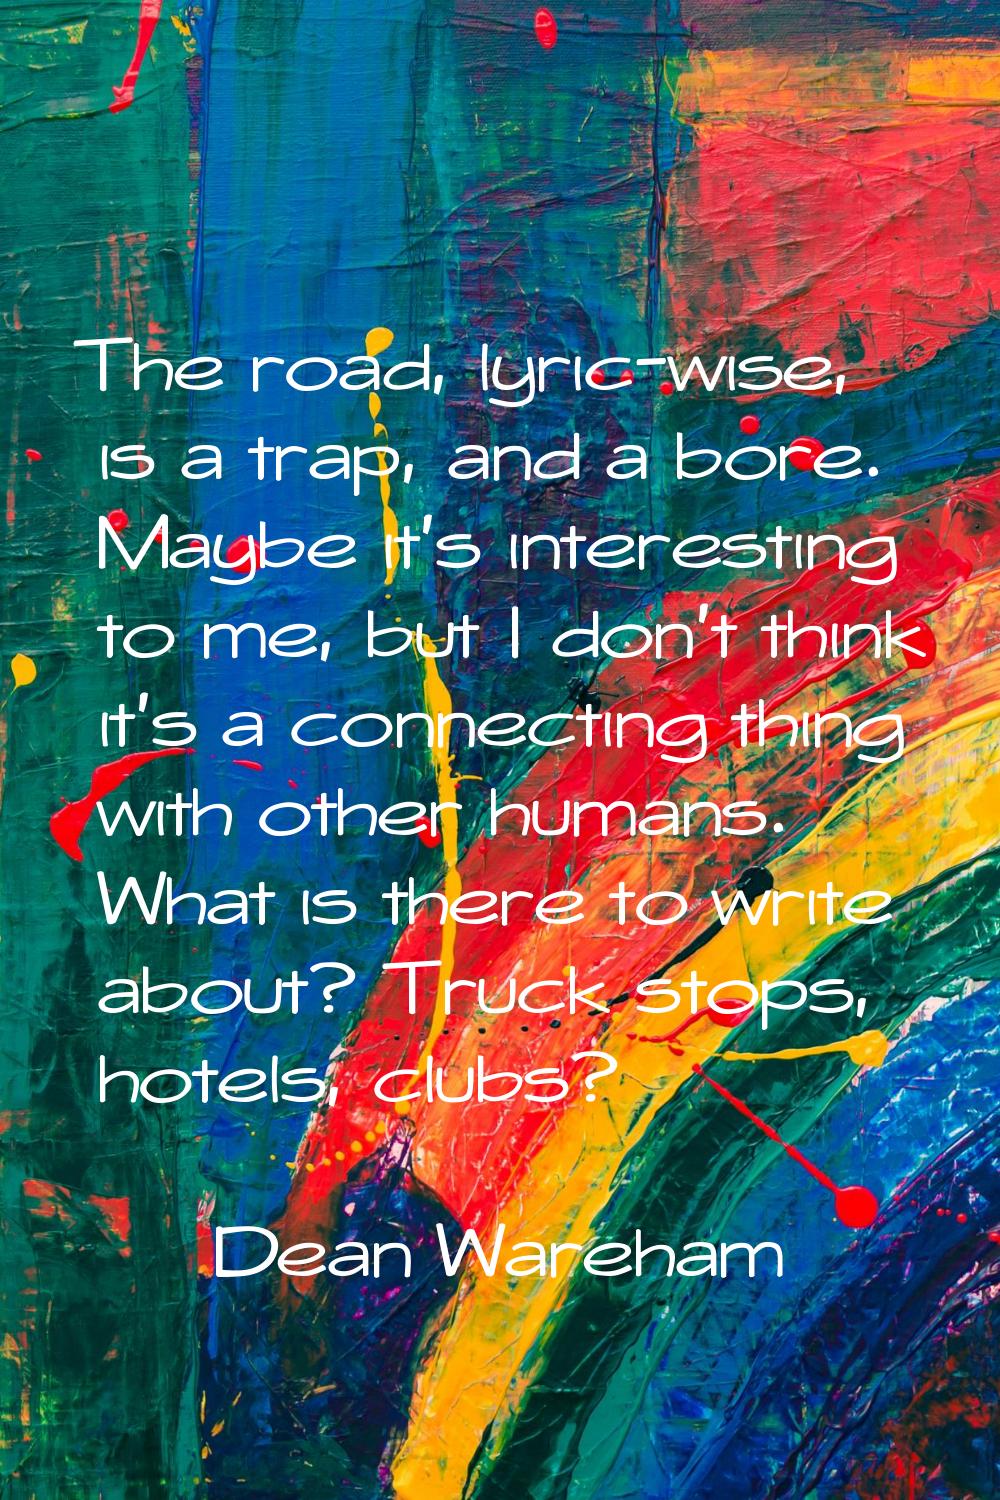 The road, lyric-wise, is a trap, and a bore. Maybe it's interesting to me, but I don't think it's a